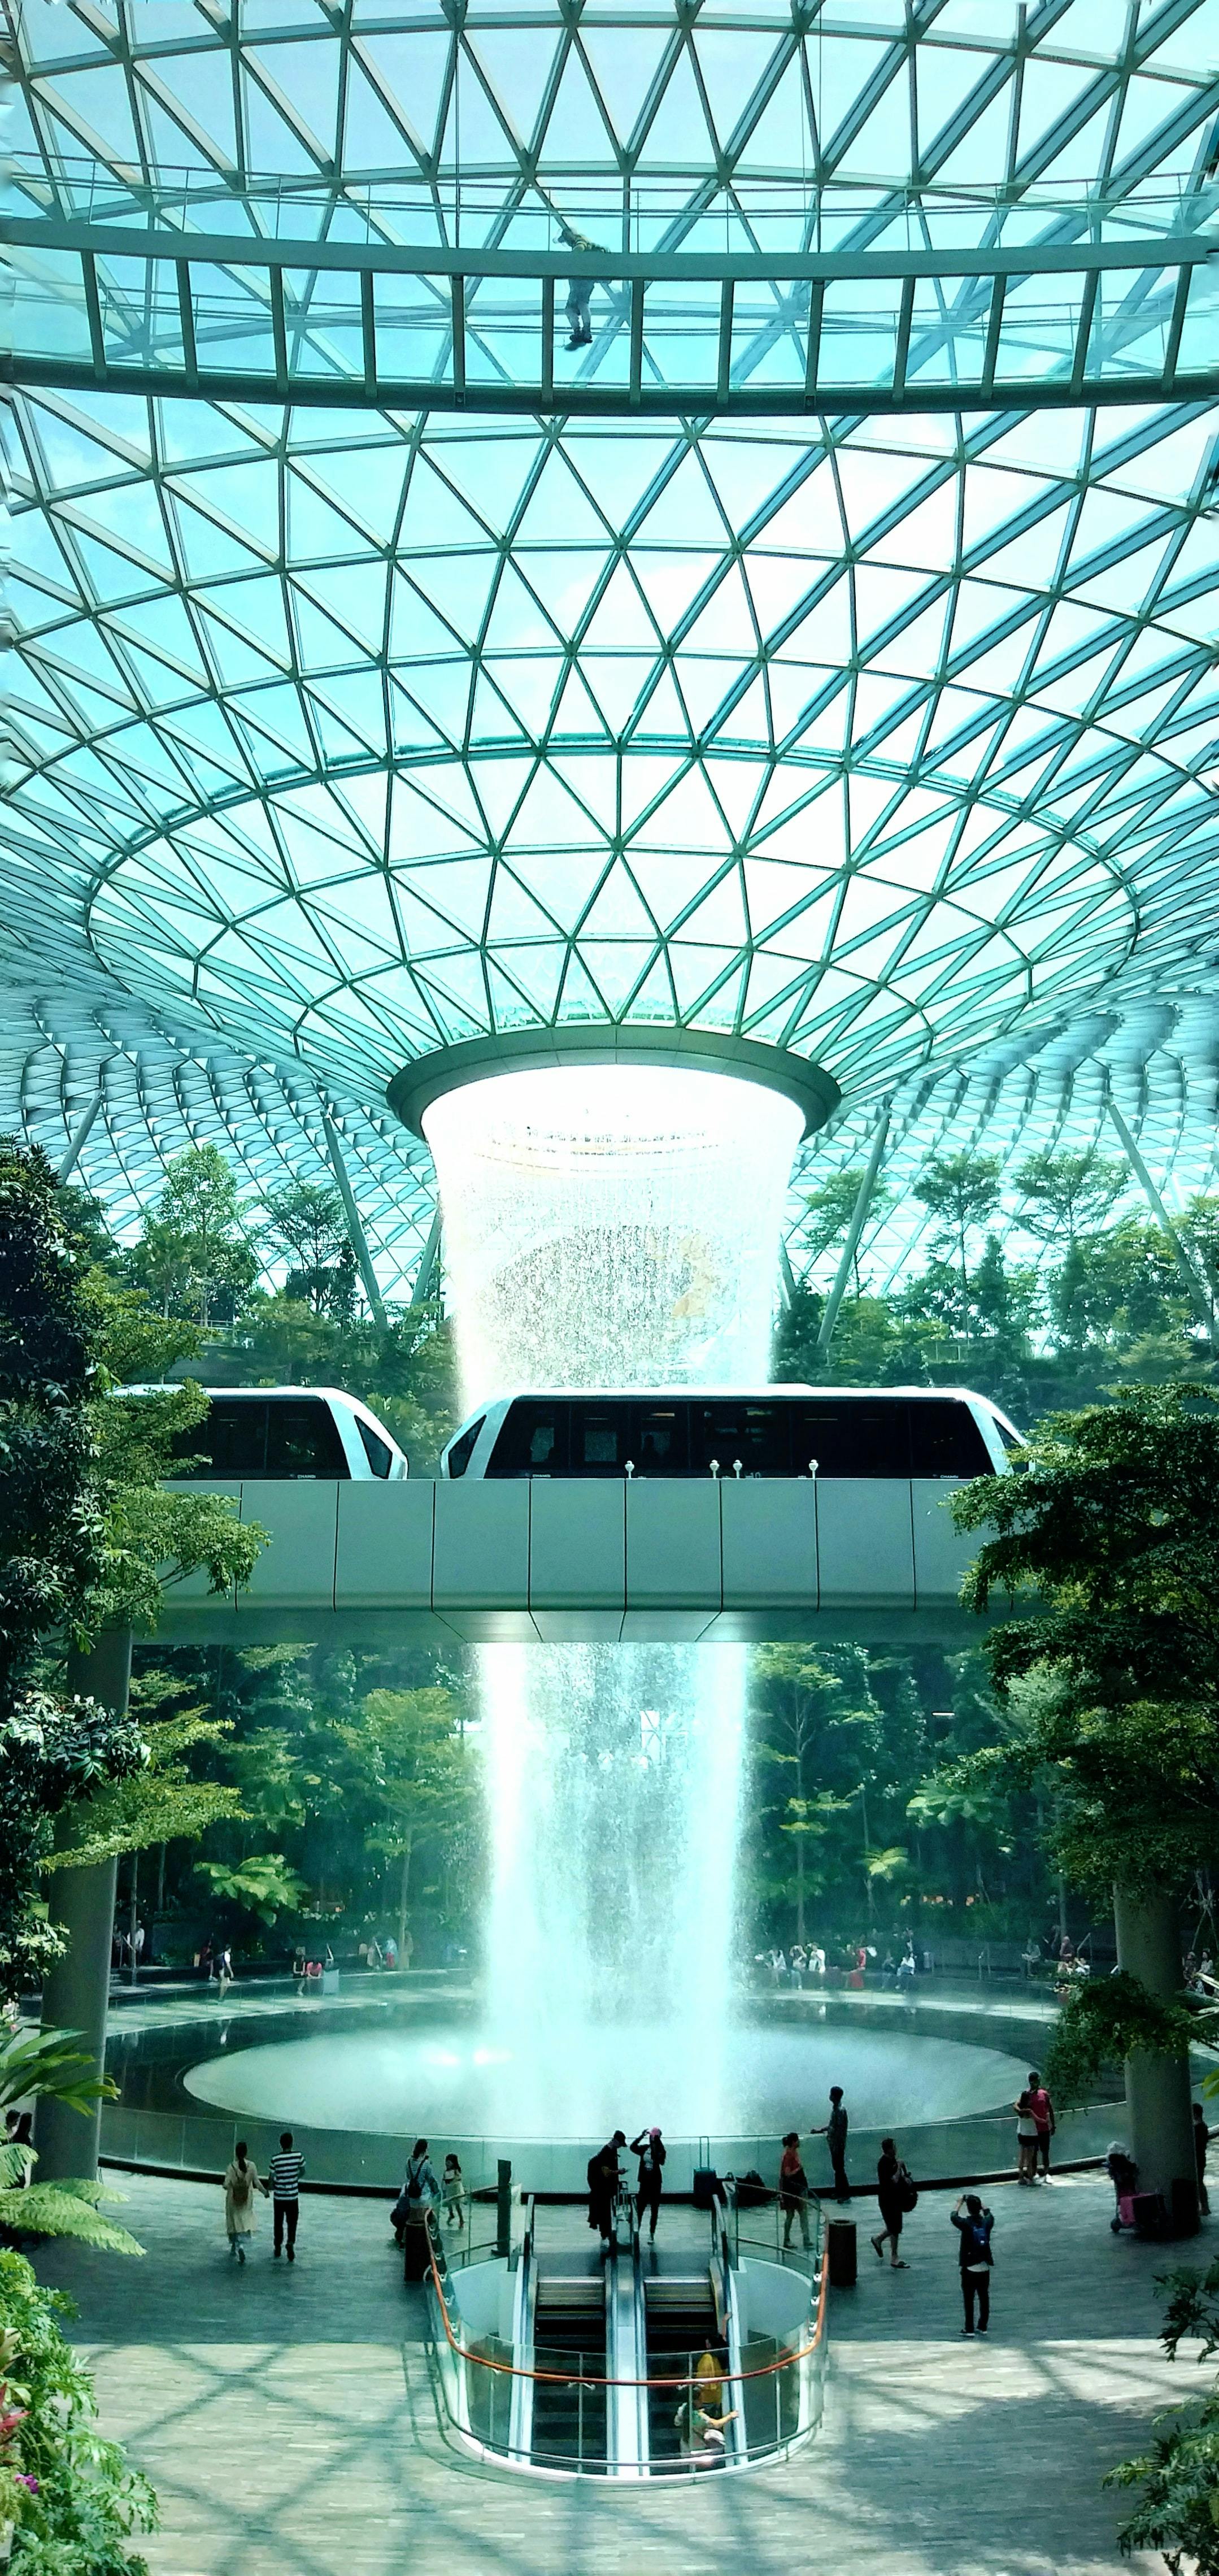 Guide to Jewel Changi Airport: 24 things you have to do, eat and see